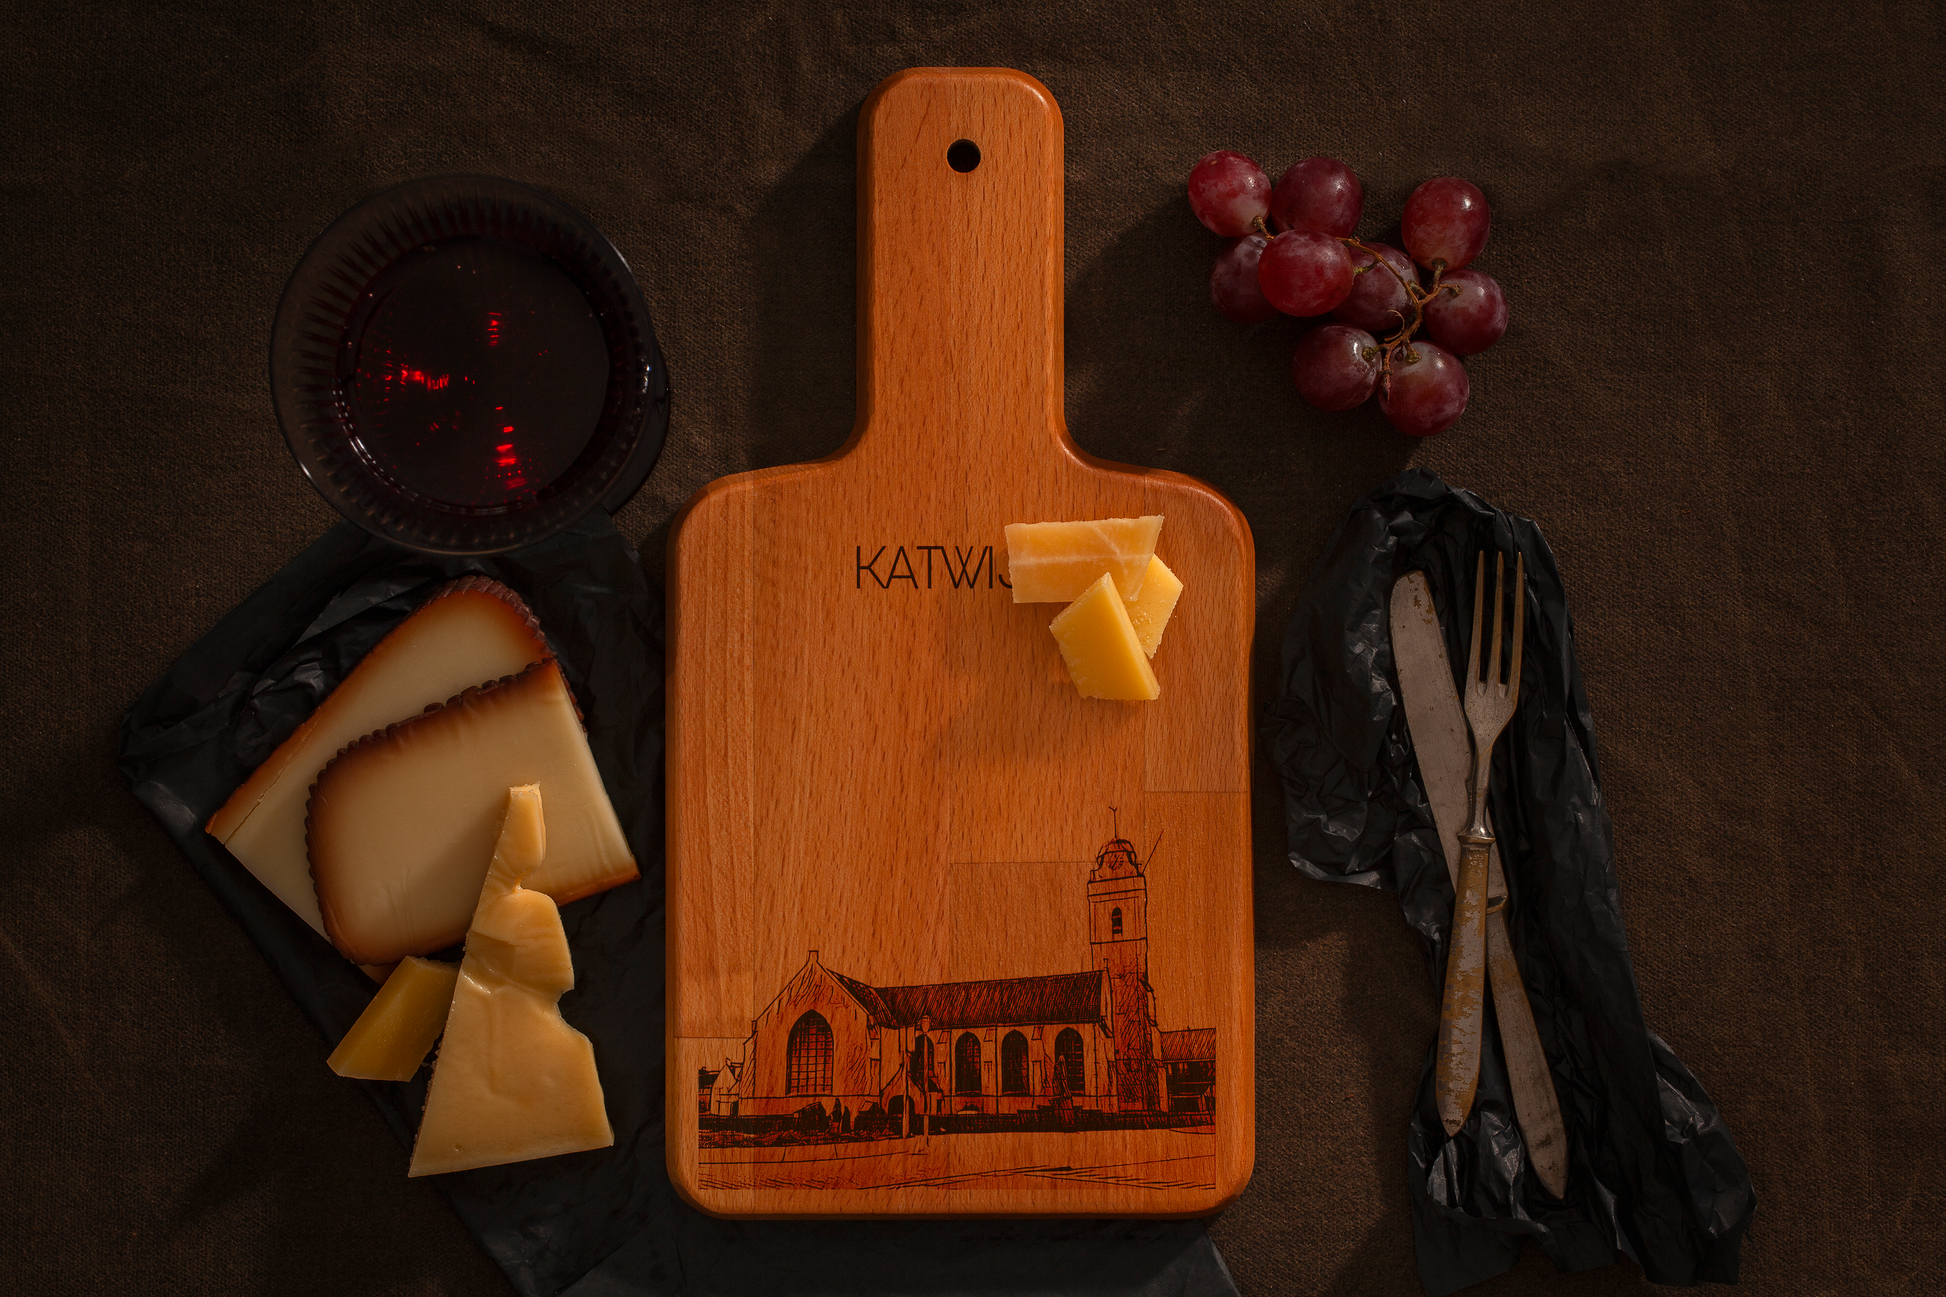 Katwijk, Andreaskerk, cheese board, with cheese